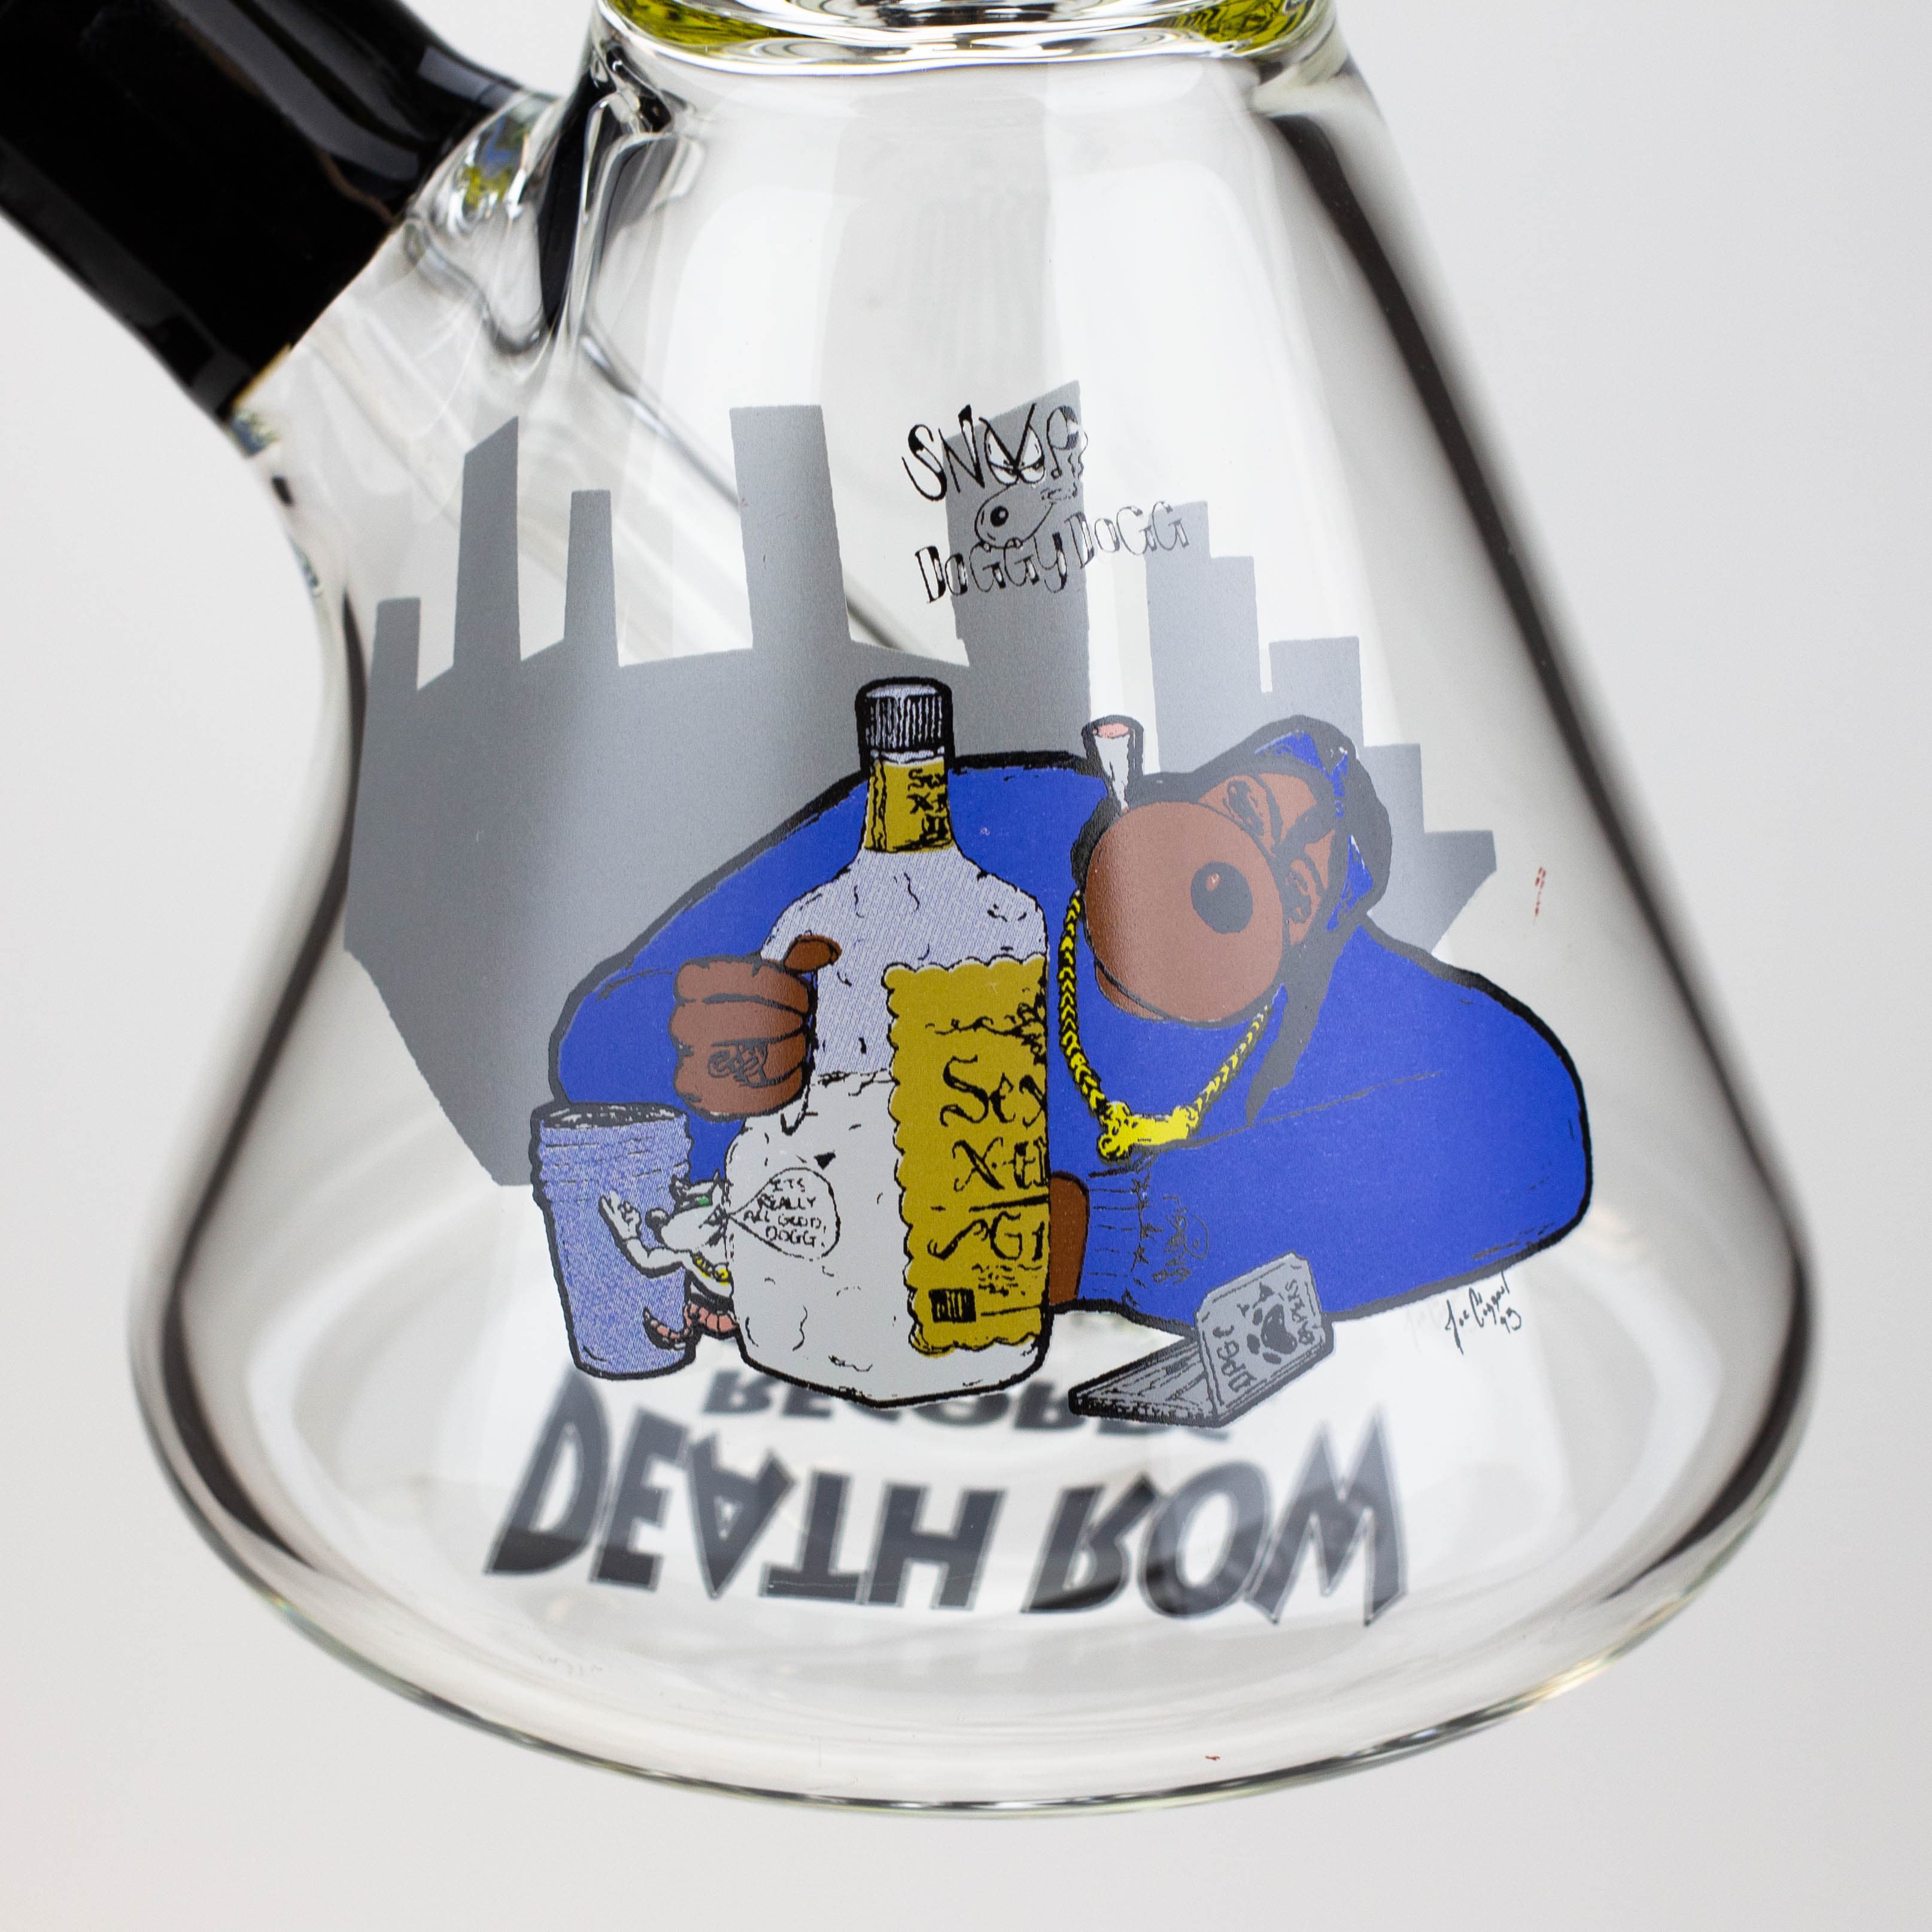 Death row 7 mm glass water pipes by infyniti 15.5"_7